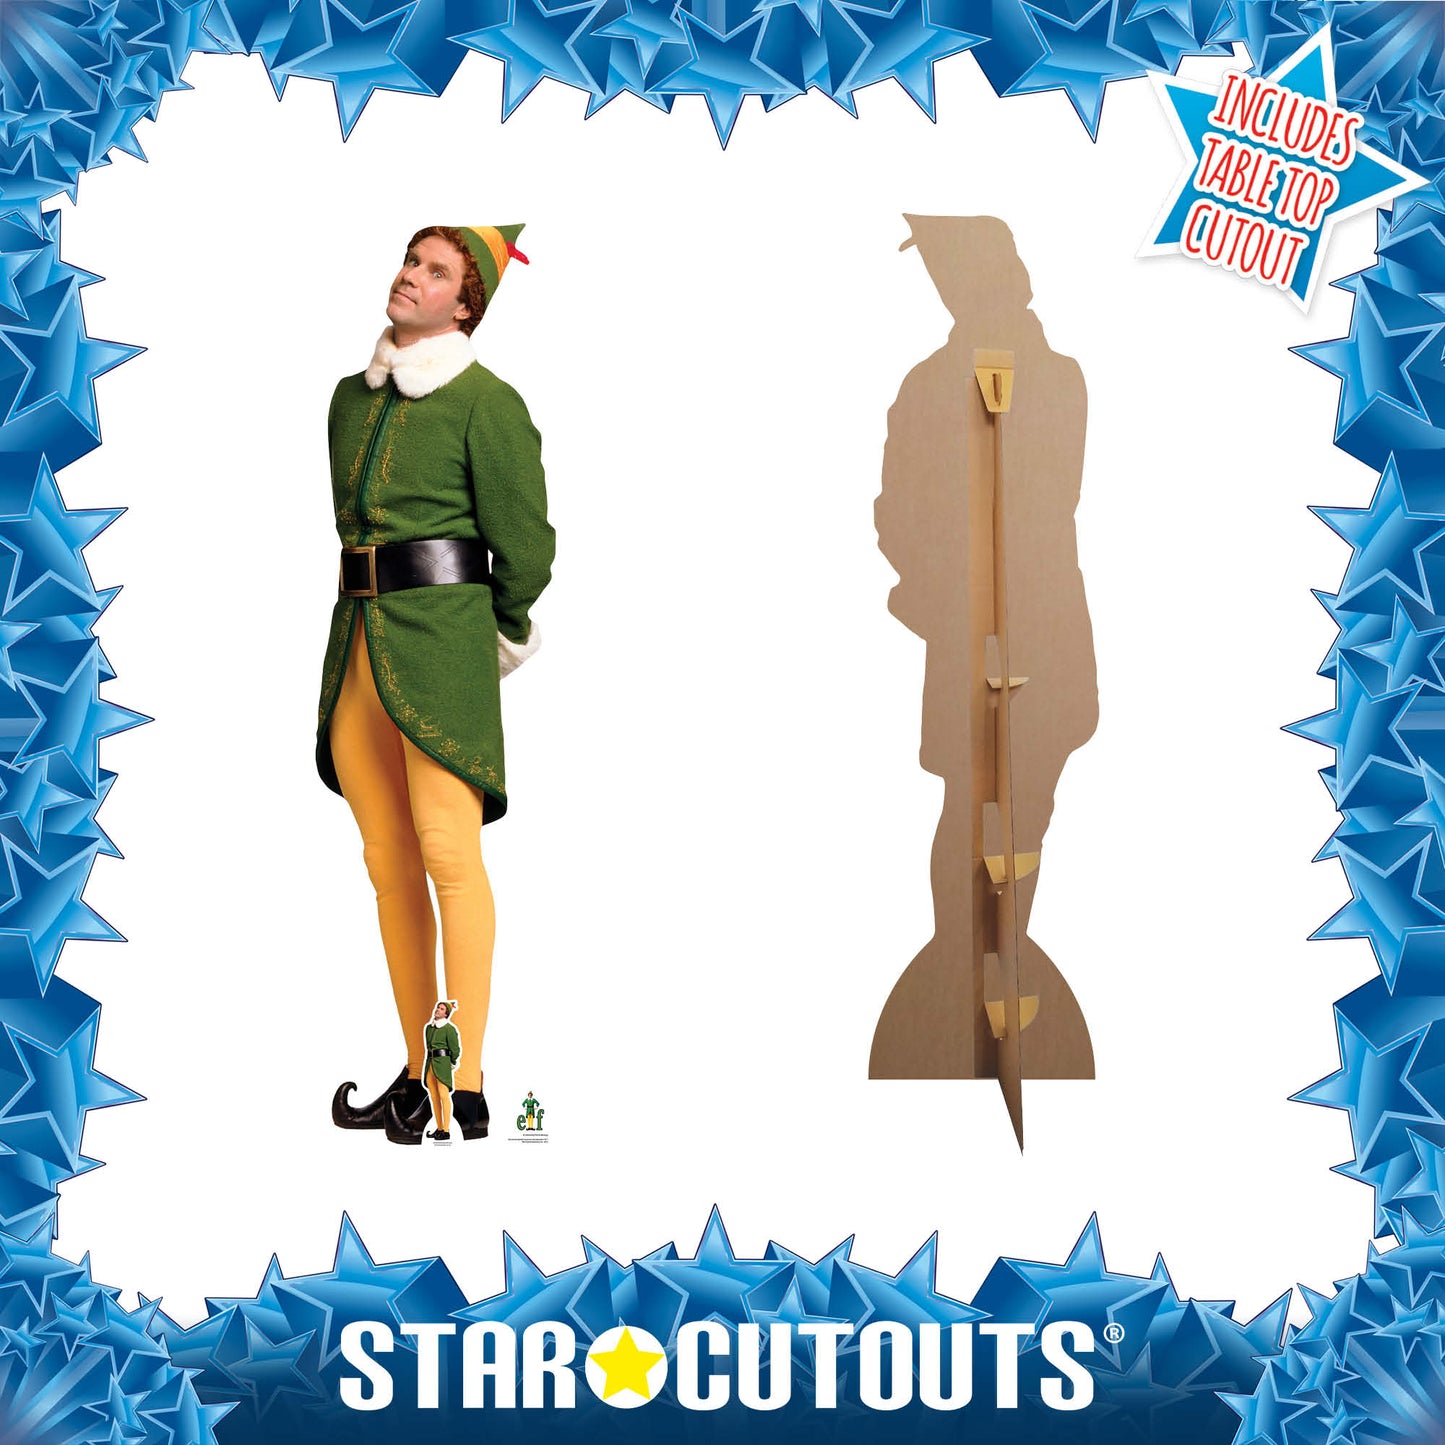 SC1696 Buddy Elf Waiting For Christmas Cardboard Cut Out Height 188cm